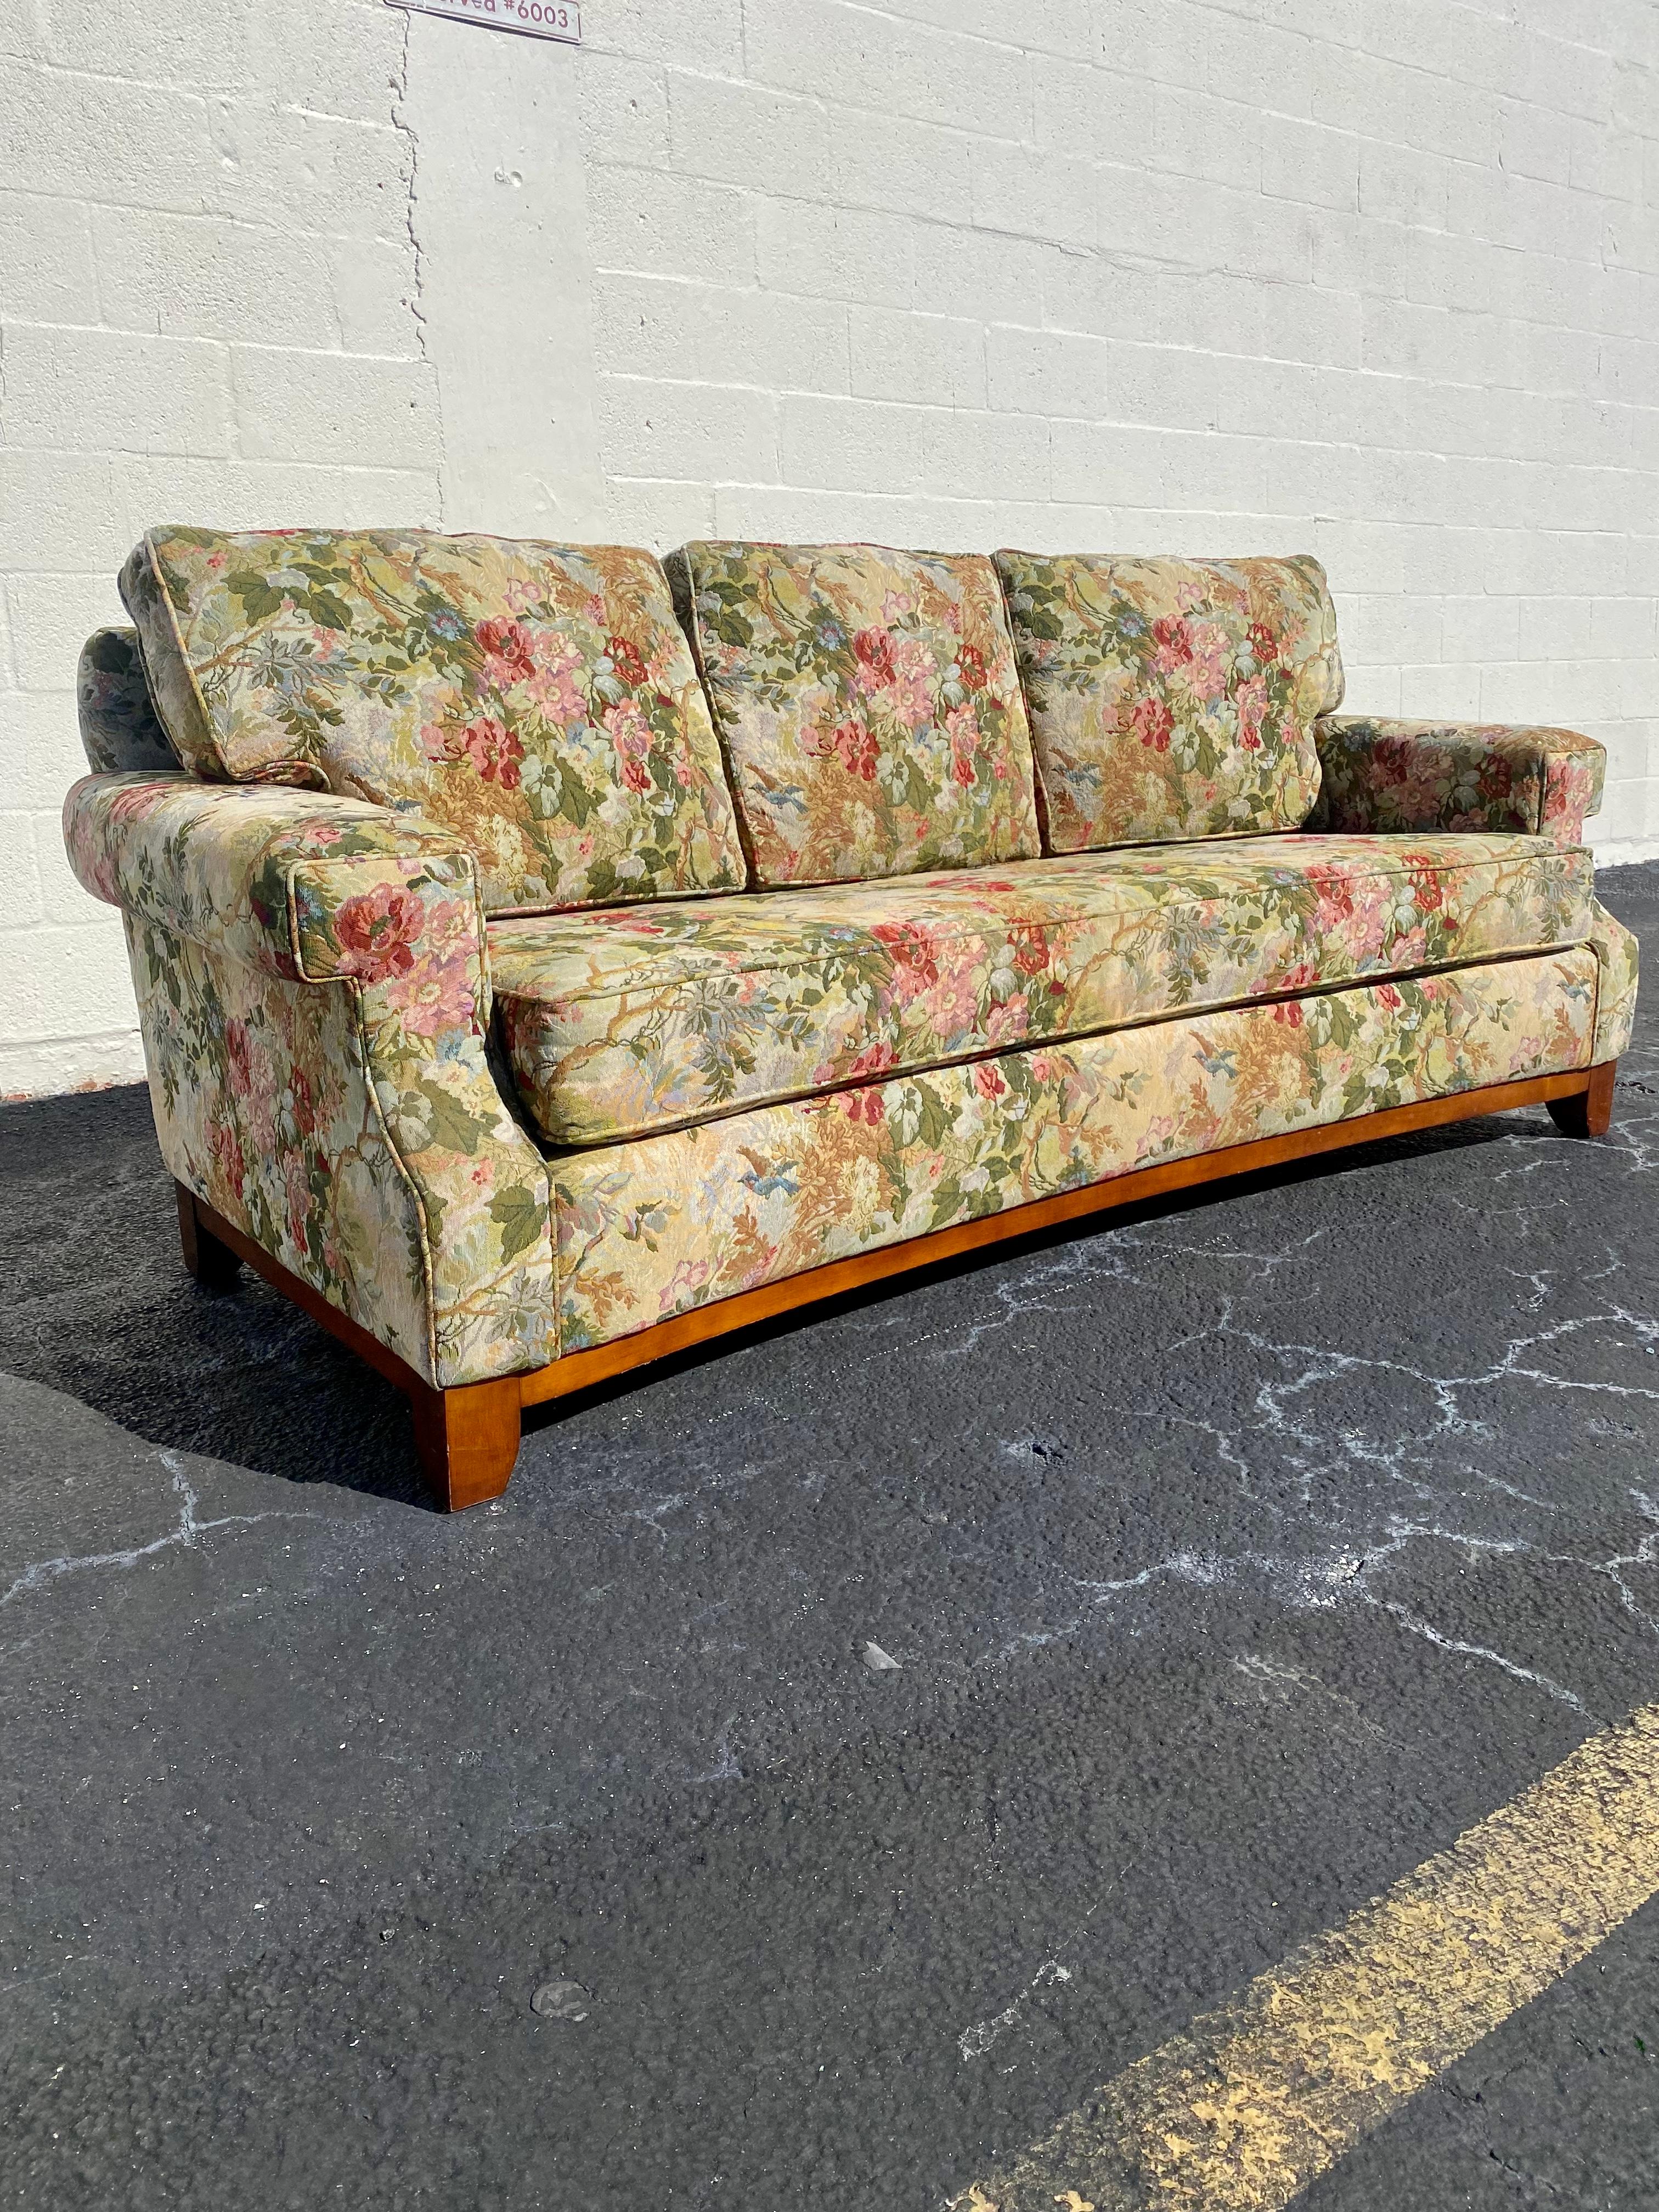 On offer on this occasion is one of the most stunning, sofa you could hope to find. Outstanding design is exhibited throughout. The beautiful sofa is statement piece which is also extremely comfortable and packed with personality!  Just look at the